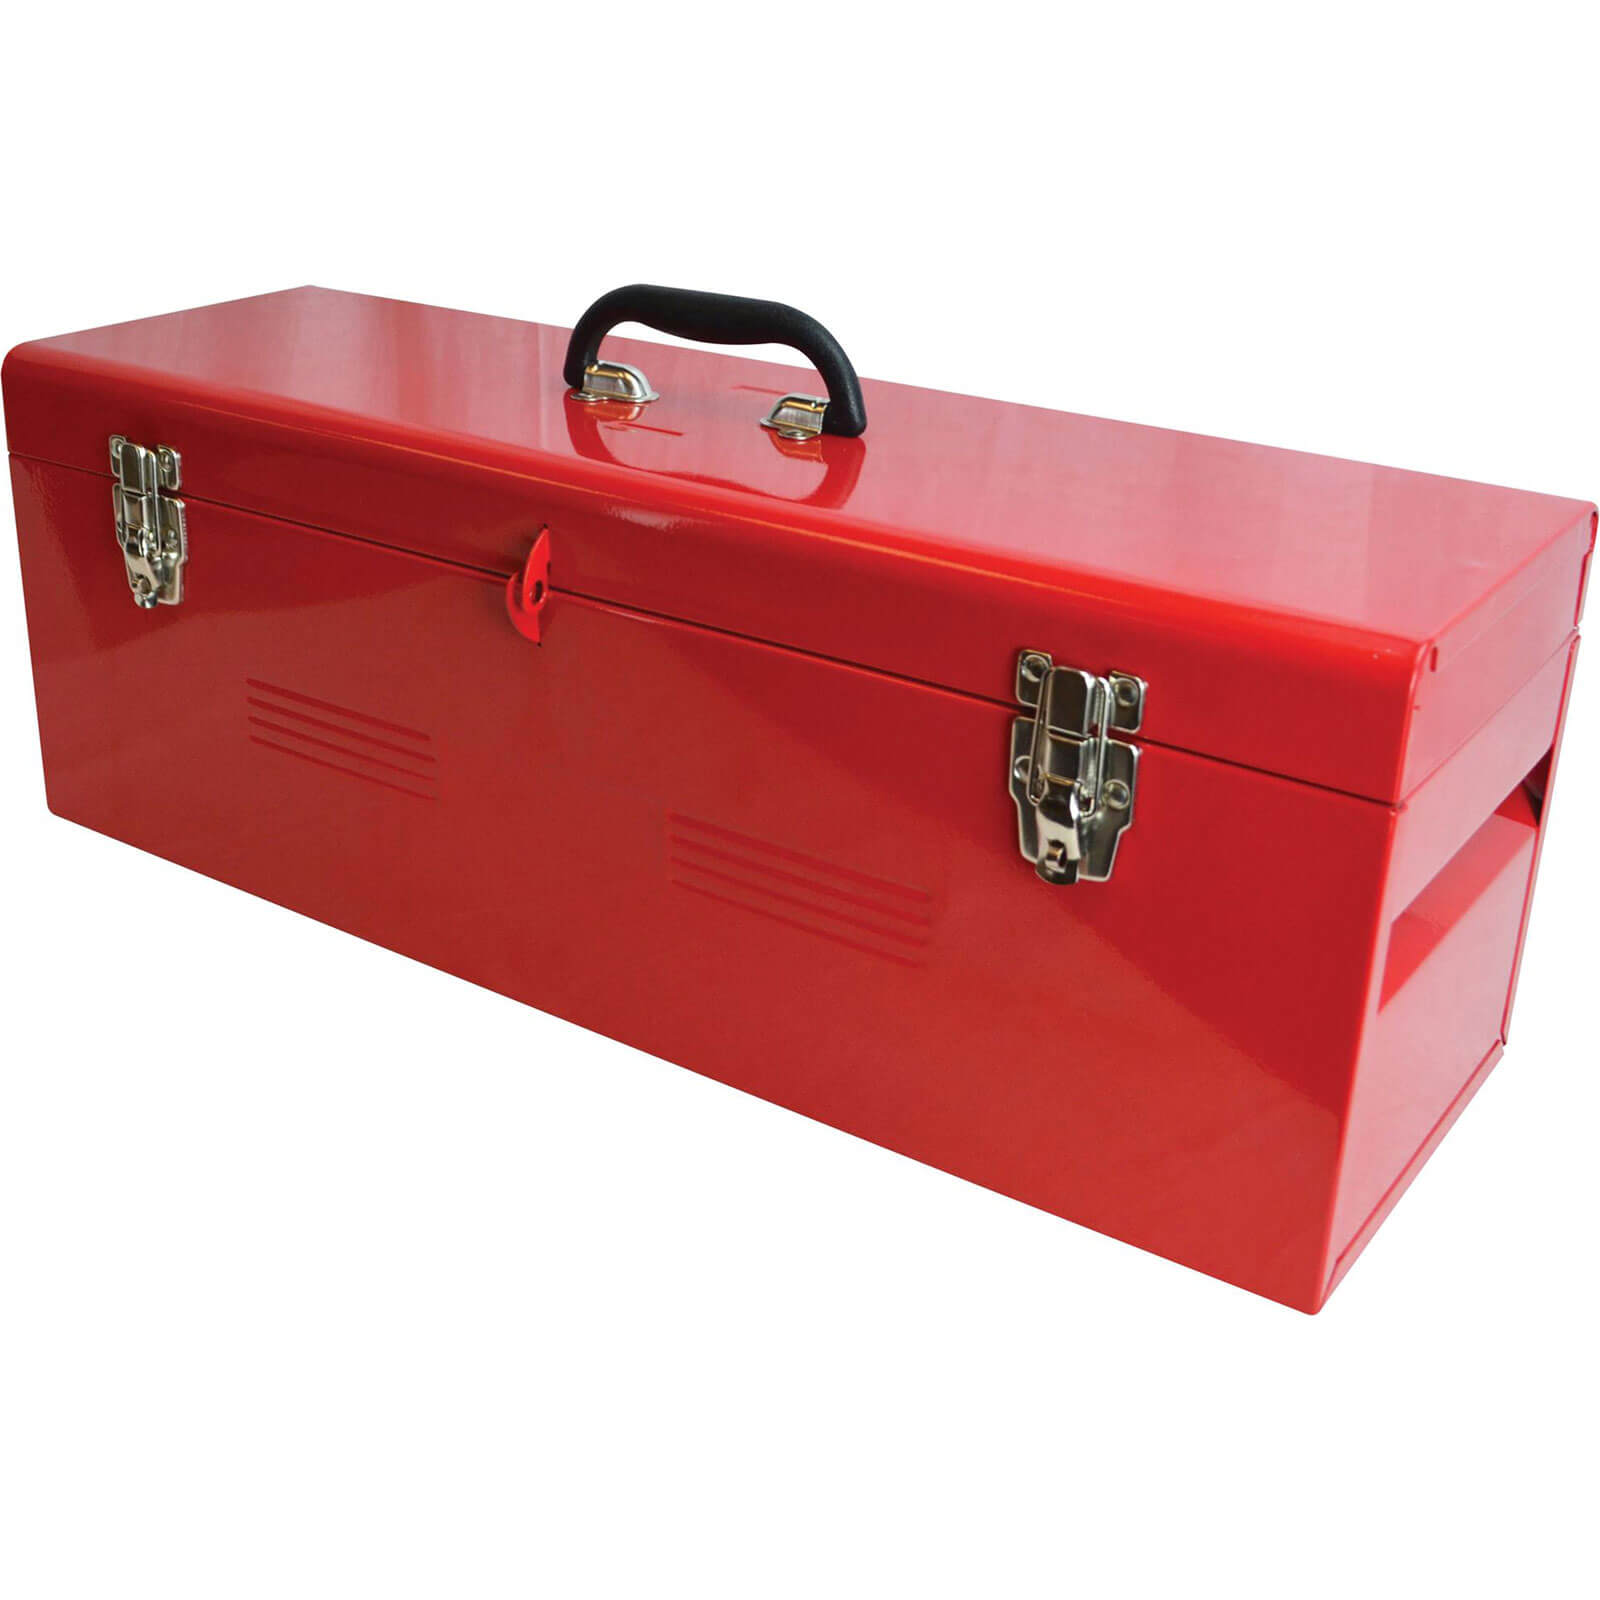 Image of Faithfull Heavy Duty Metal Tool Box and Tote Tray 670mm 218mm 240mm